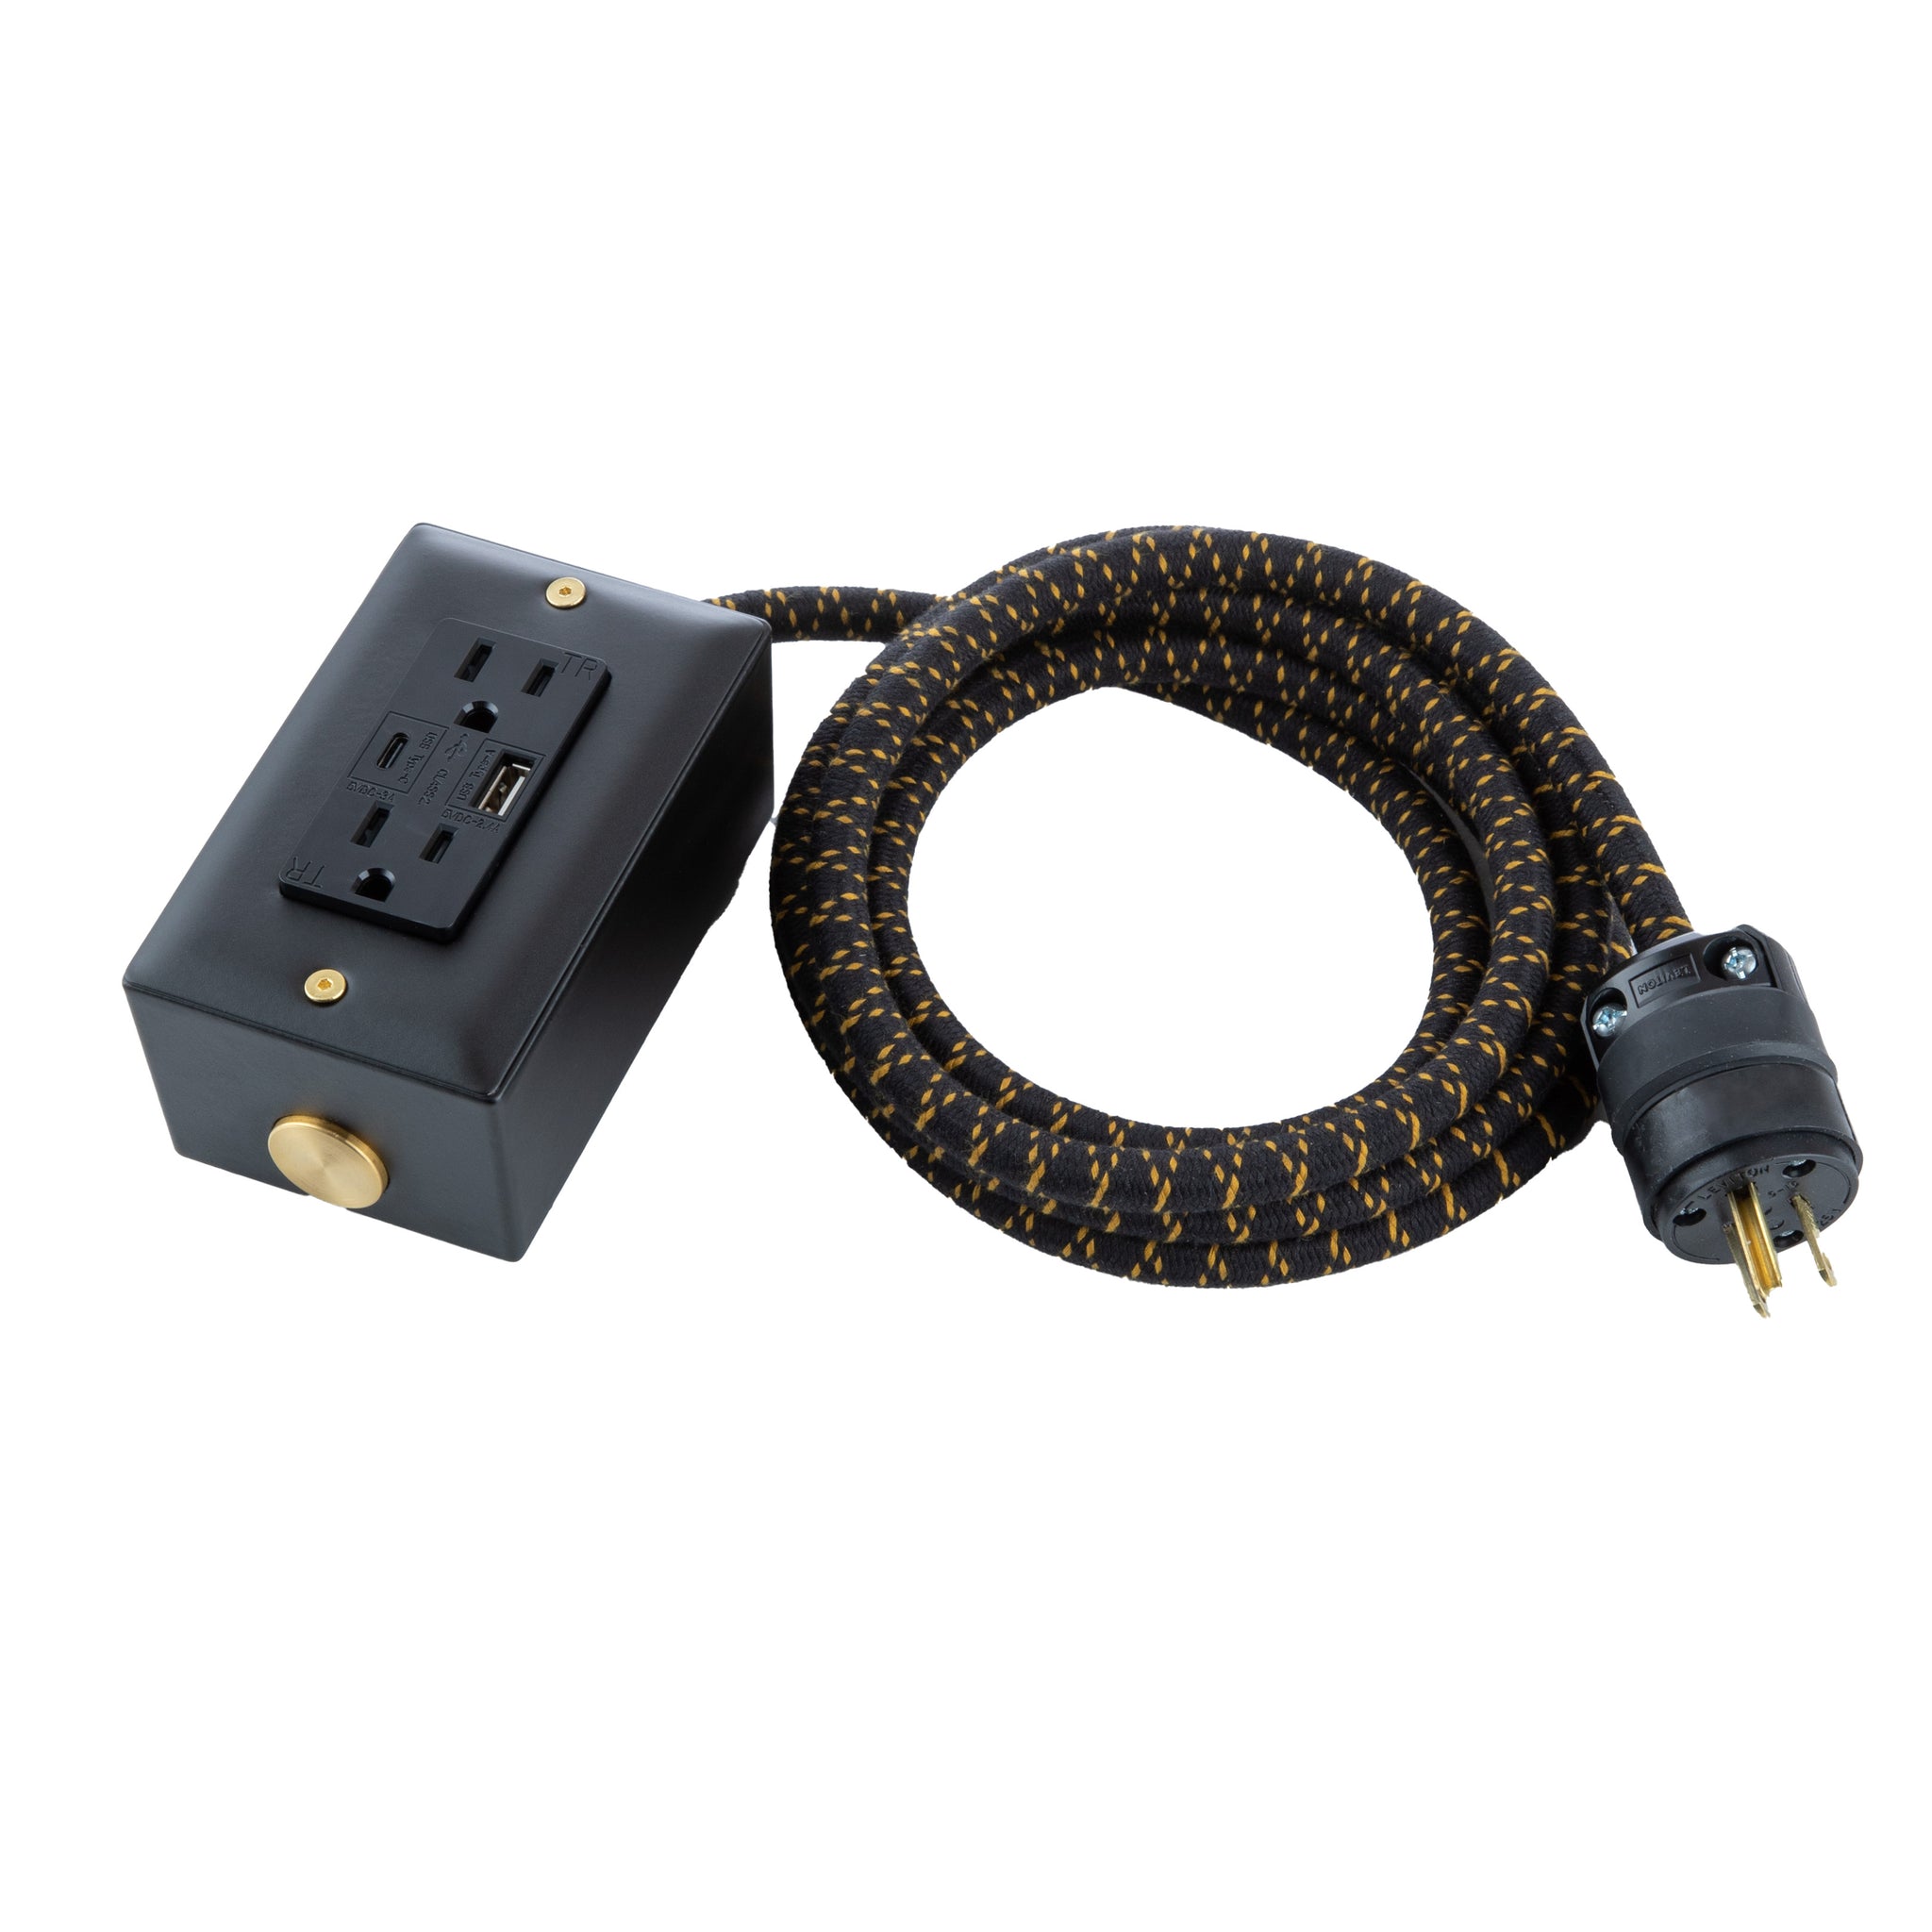 New! Extō USBC Carrara Black & Brass - The First Smart Charging USB Type C® Power Extension - USBC Dual-Outlet 15AMP Power Cord